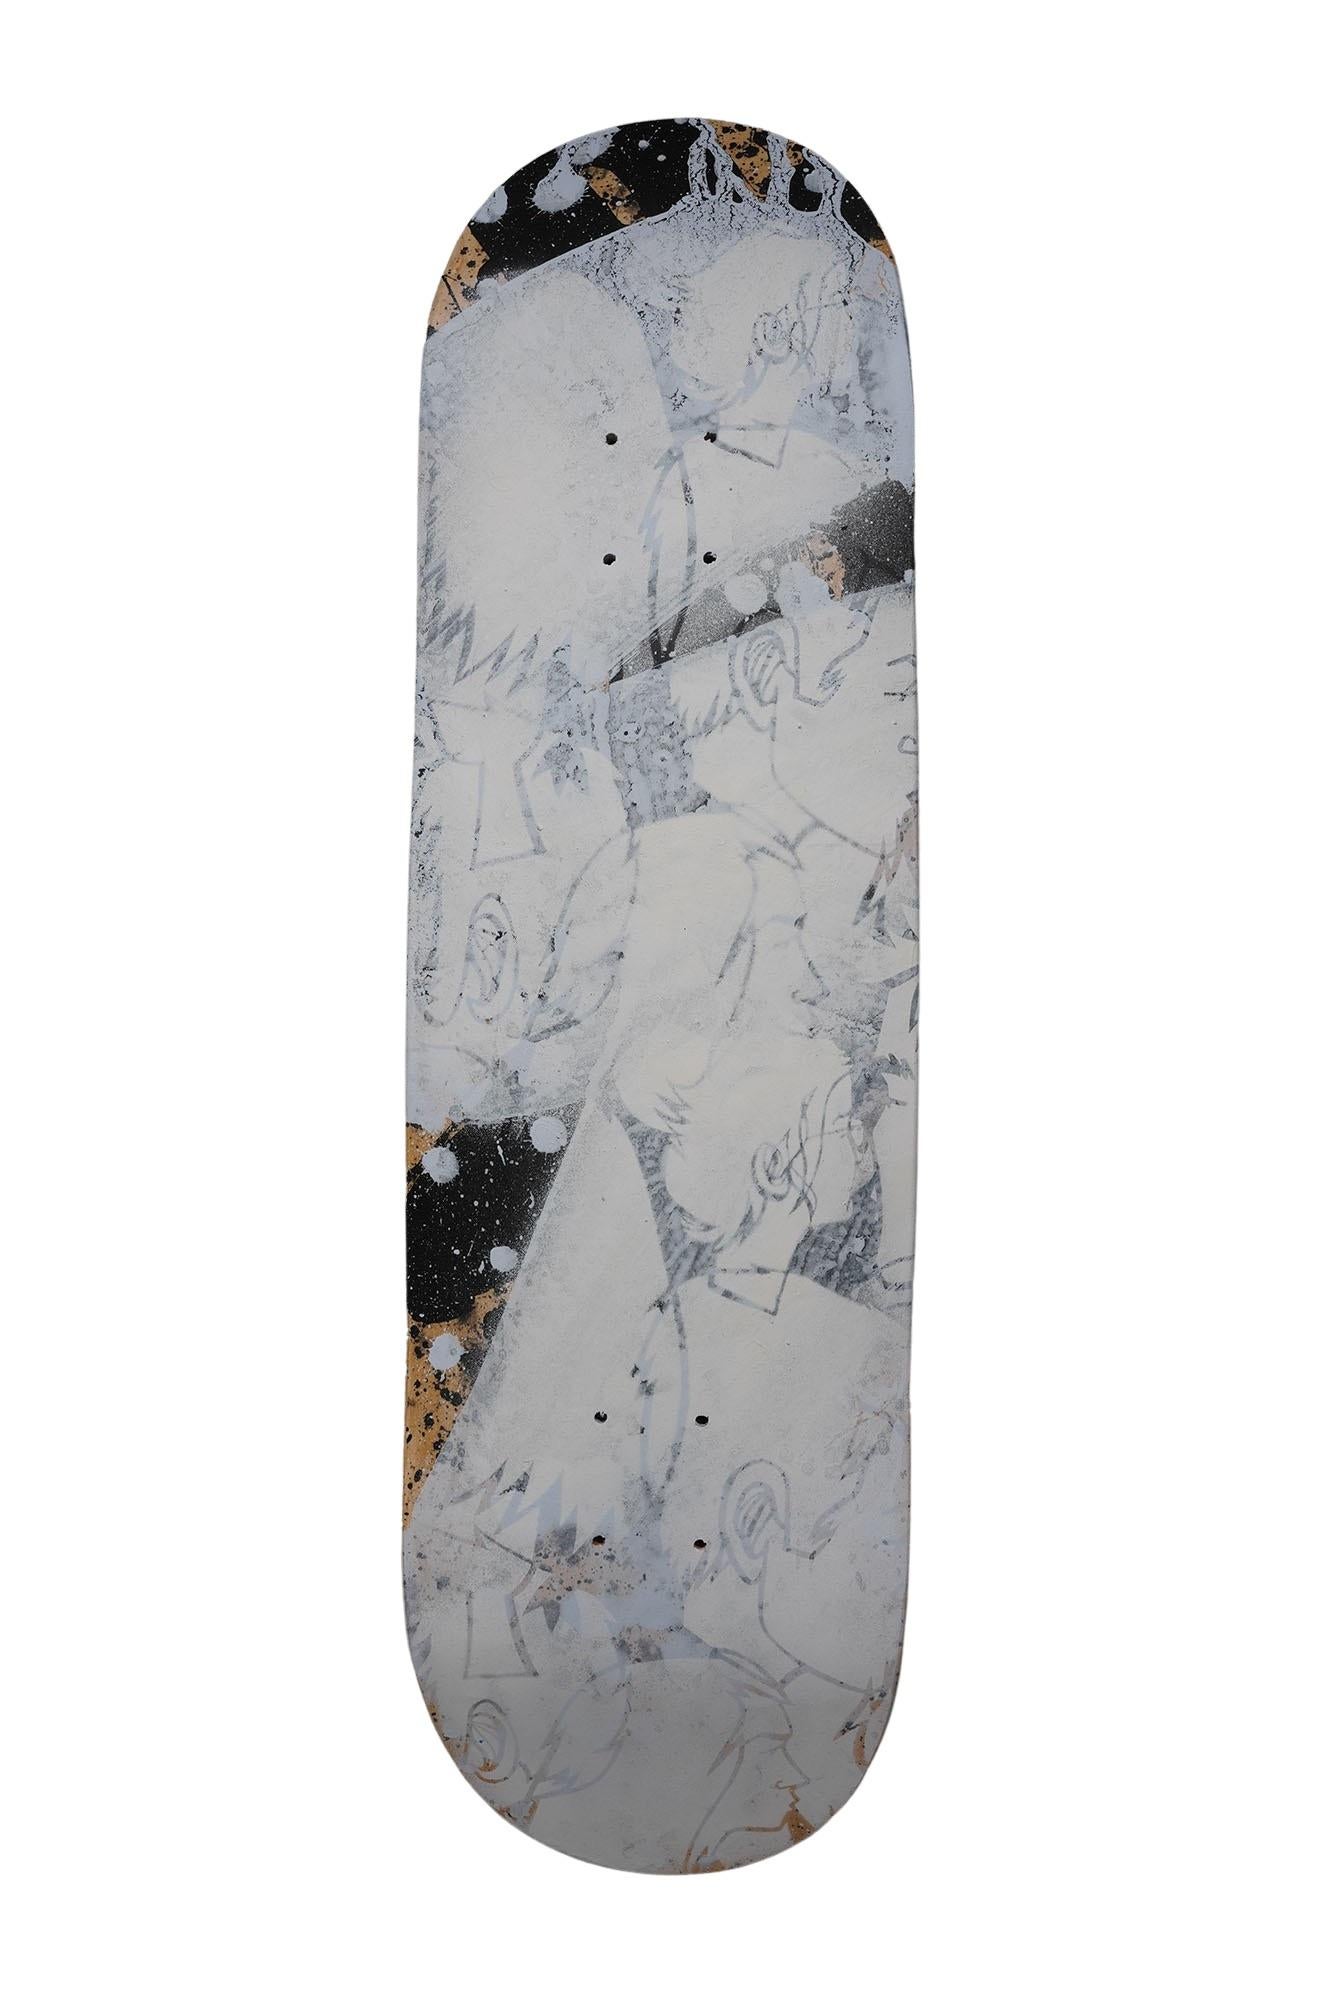 Denis Meyers Abstract Painting - Skate 03